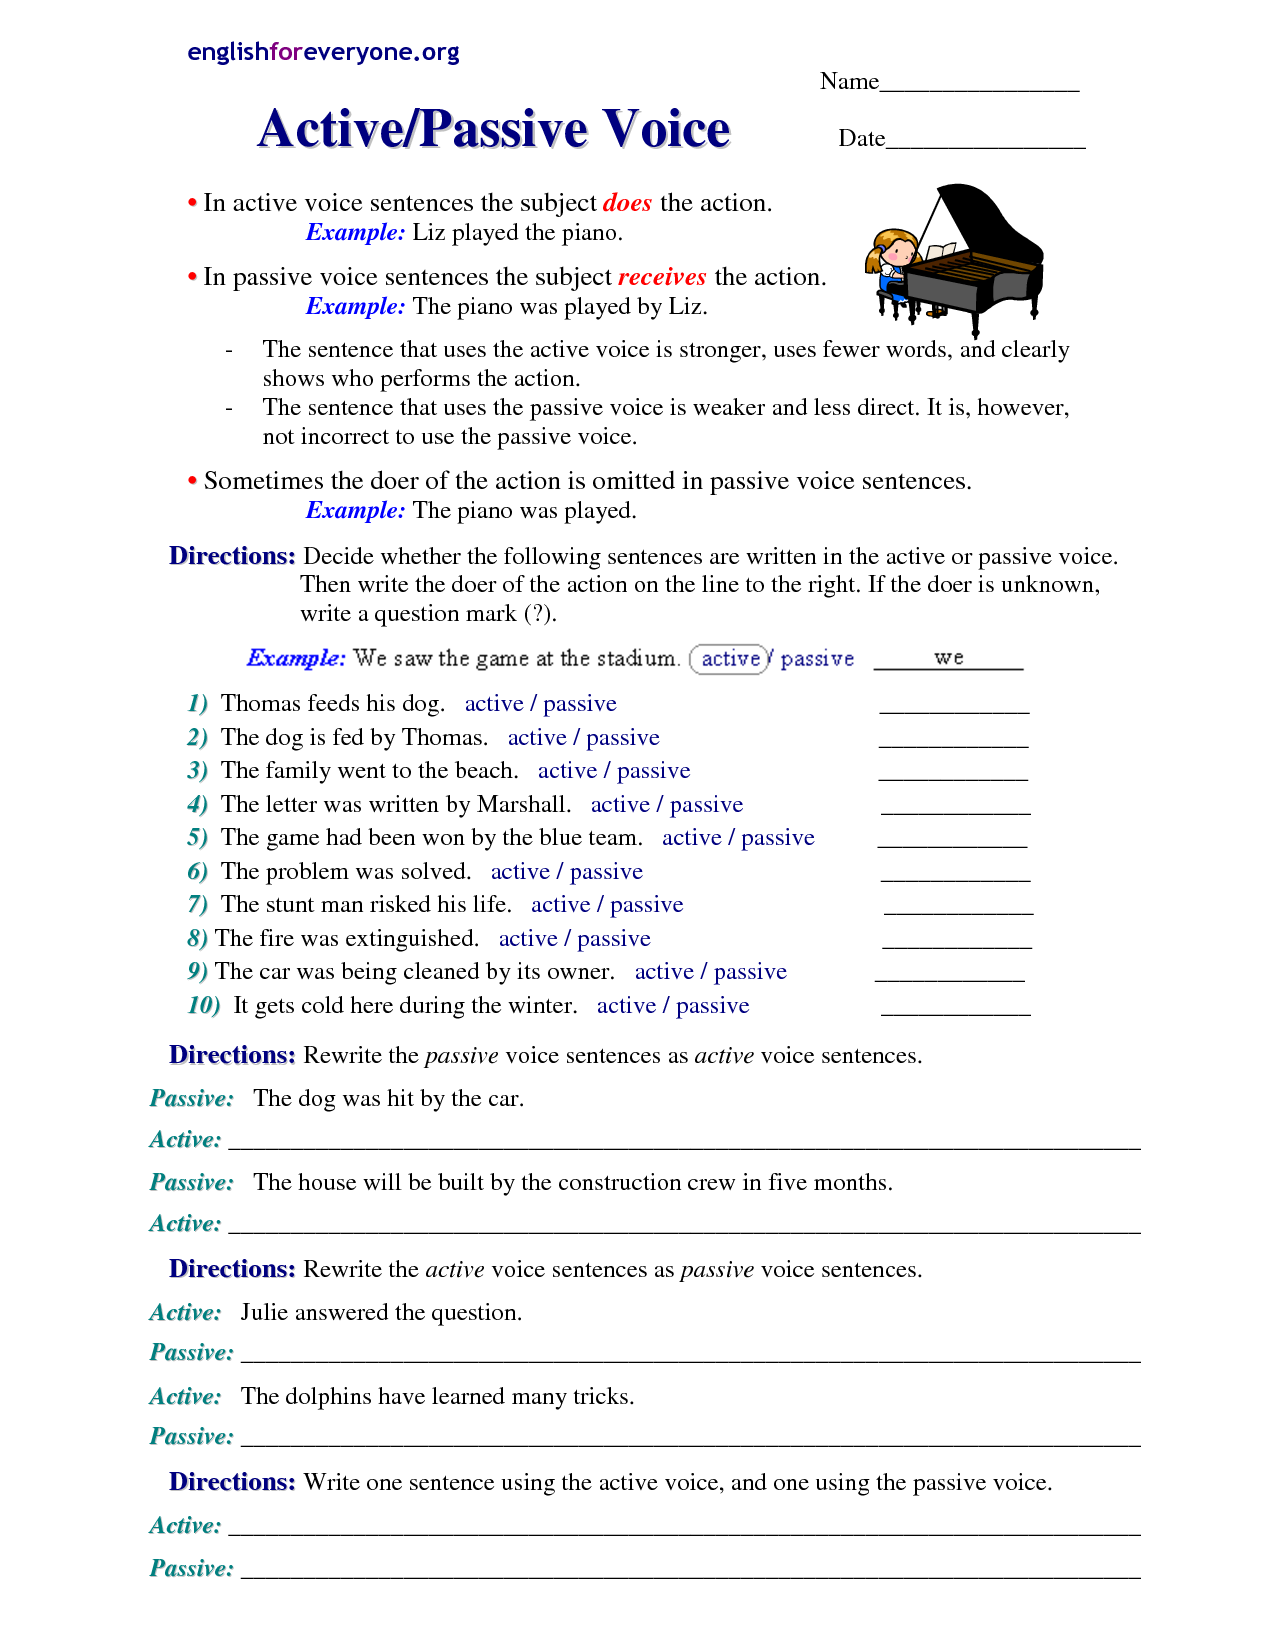 active-passive-voice-worksheets-your-home-teacher-active-and-passive-voice-active-voice